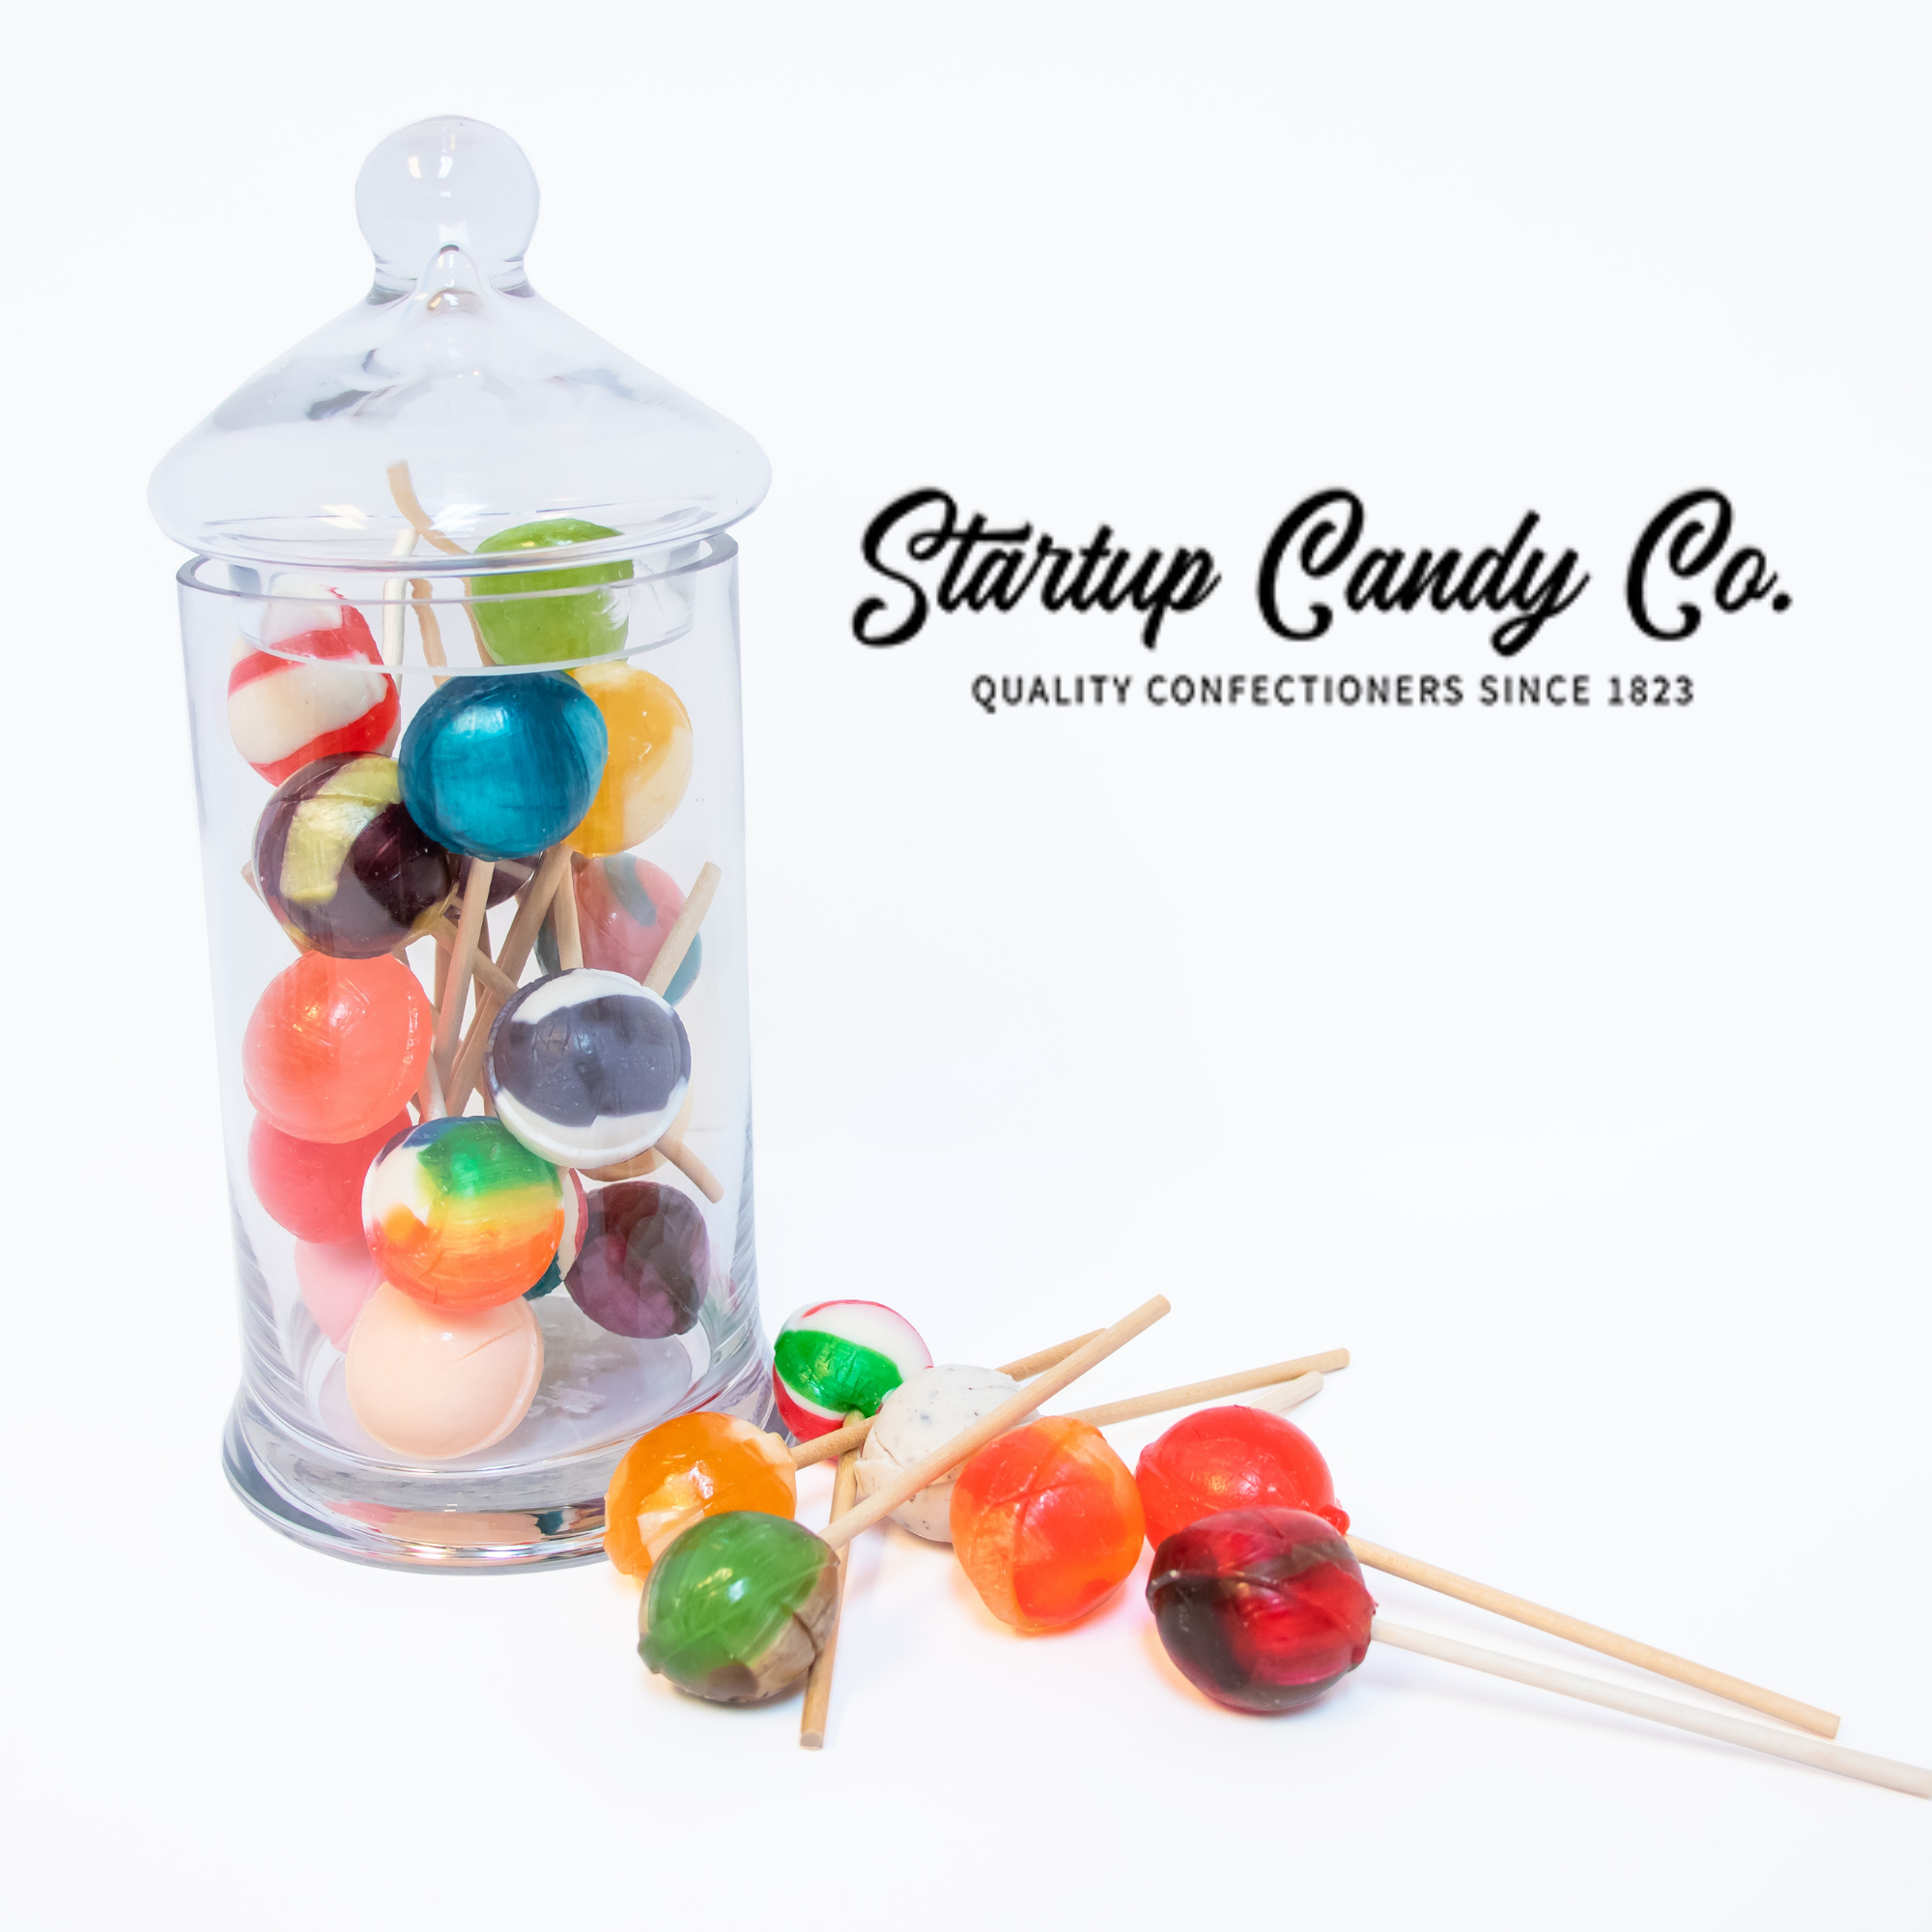 Startup Candy